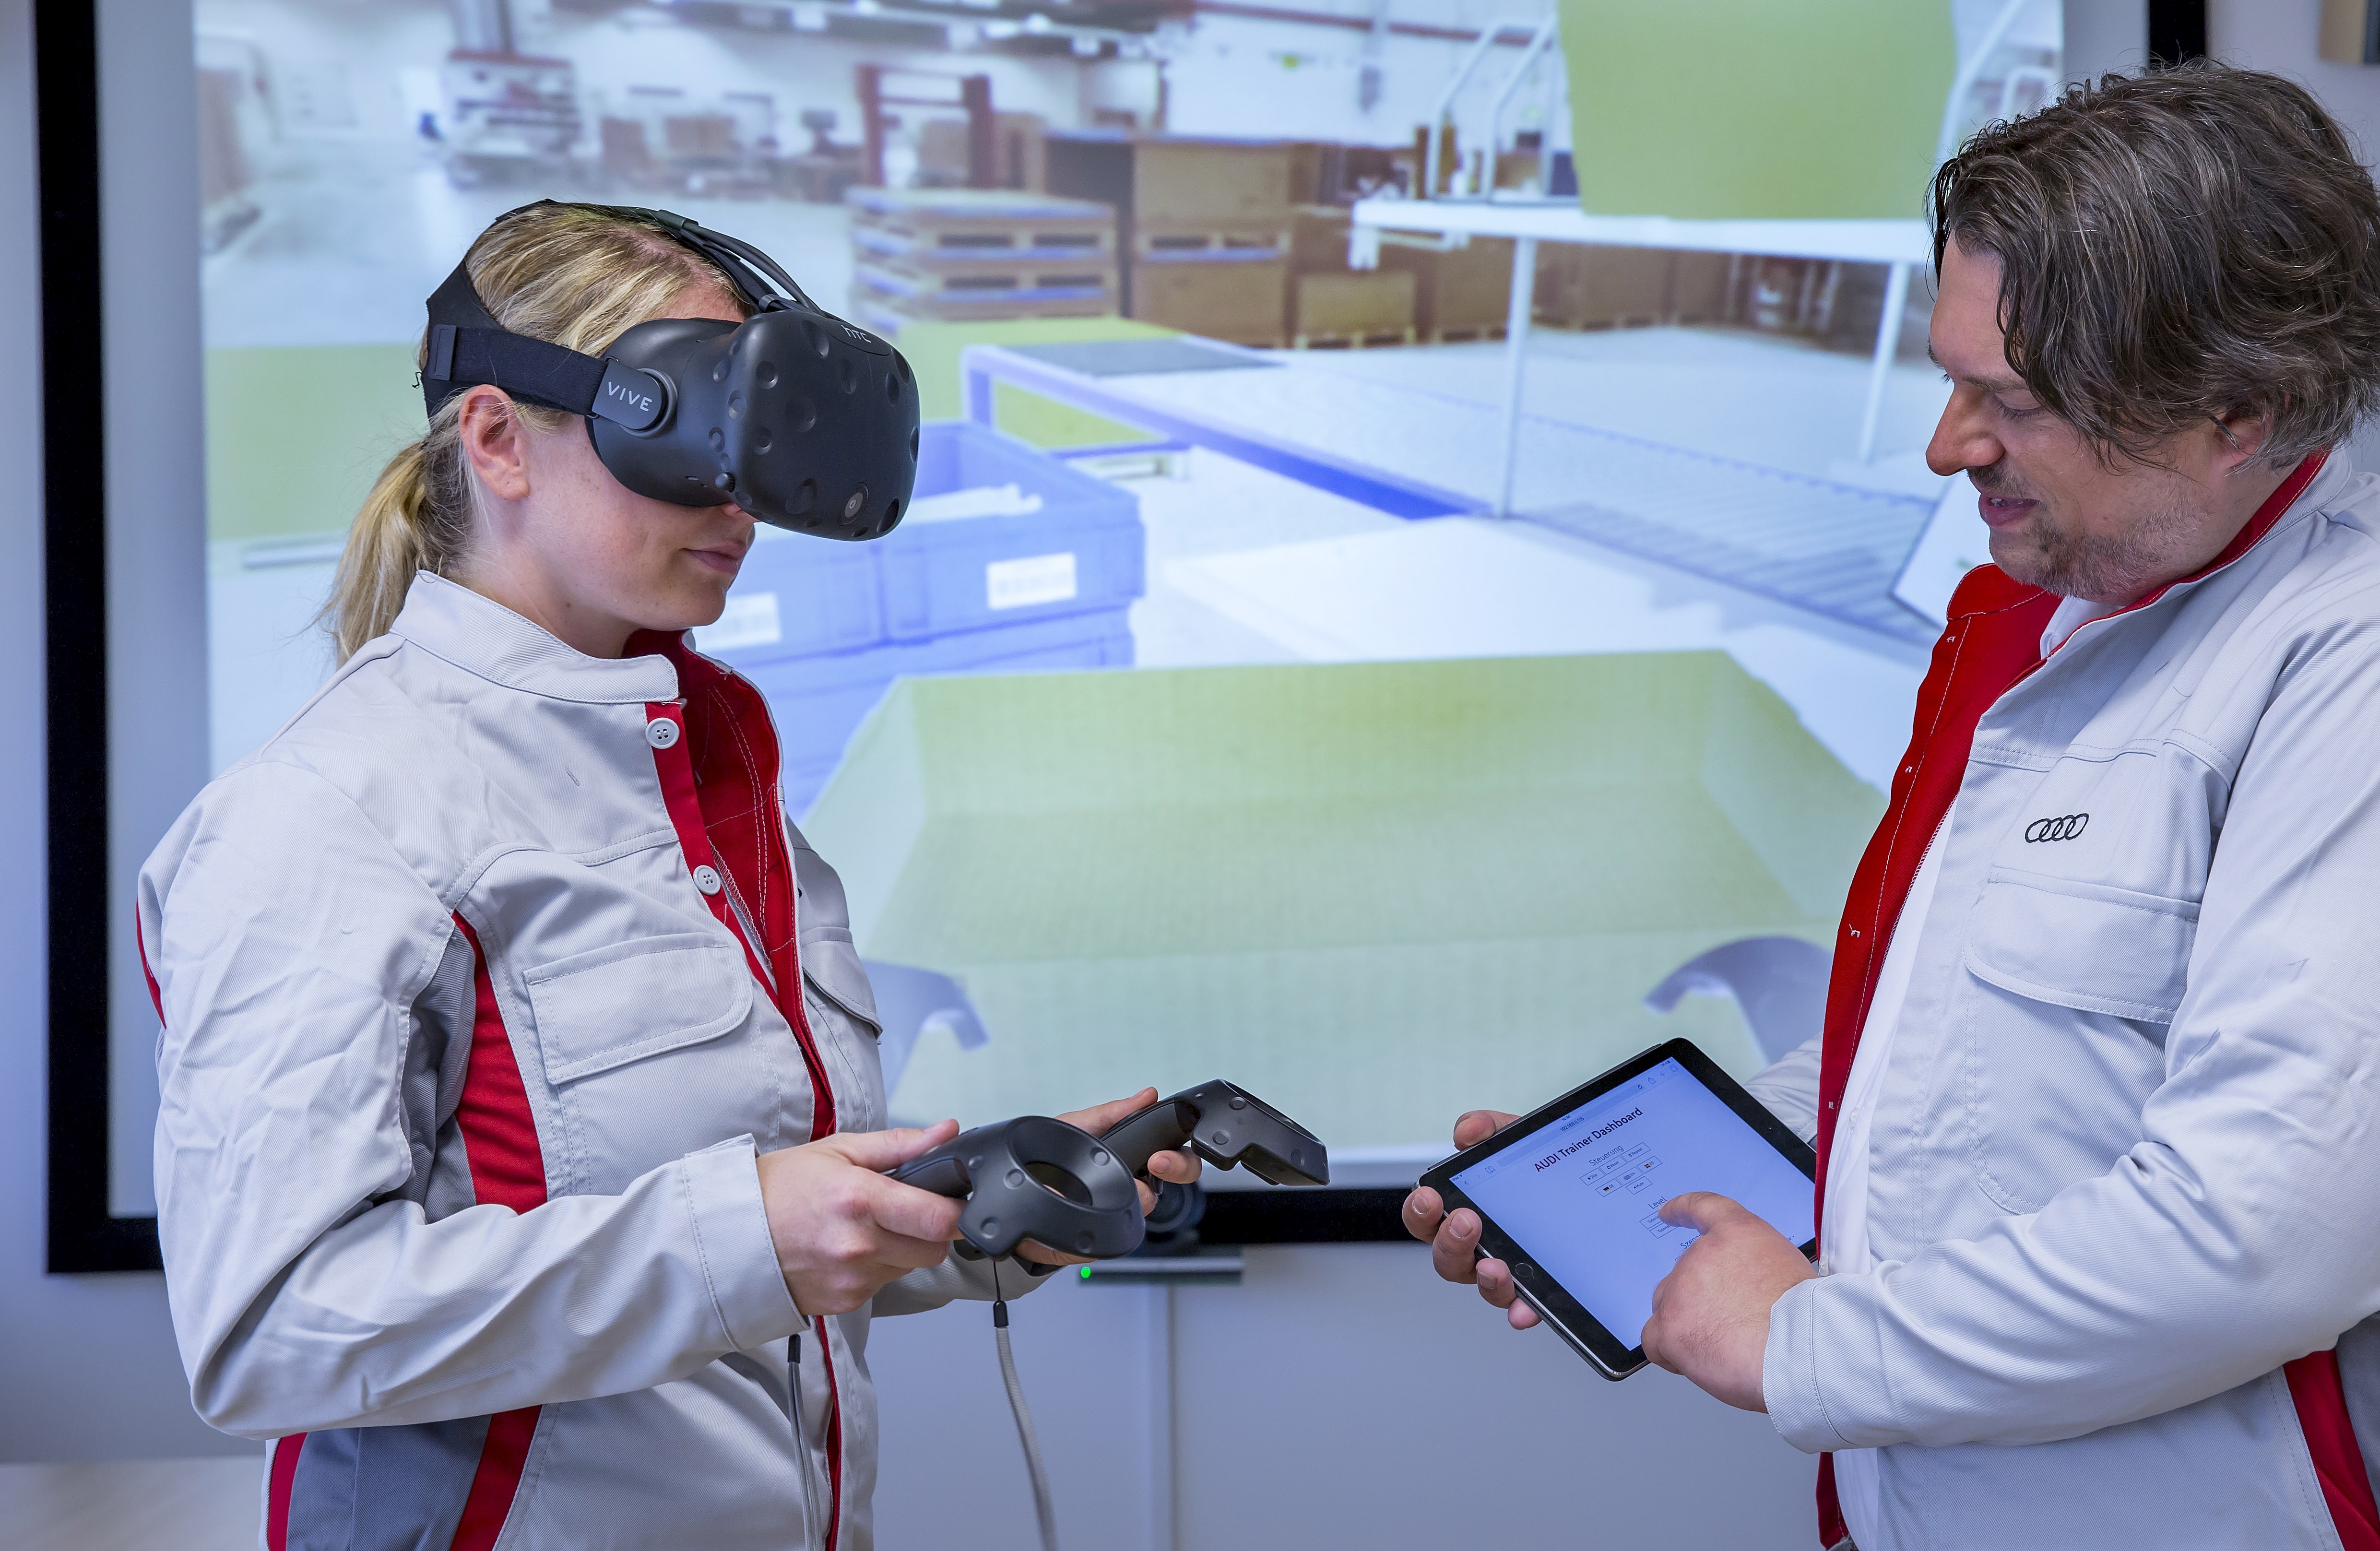 Together with a trainer, an Audi Packing Logistics employee practices the proper techniques for packing brake discs and other large parts for shipping overseas. Thanks to a pair of virtual reality glasses, she can train in a realistic and true-to-life simulation of her work station in Hall L of the Ingolstadt Logistics Center.